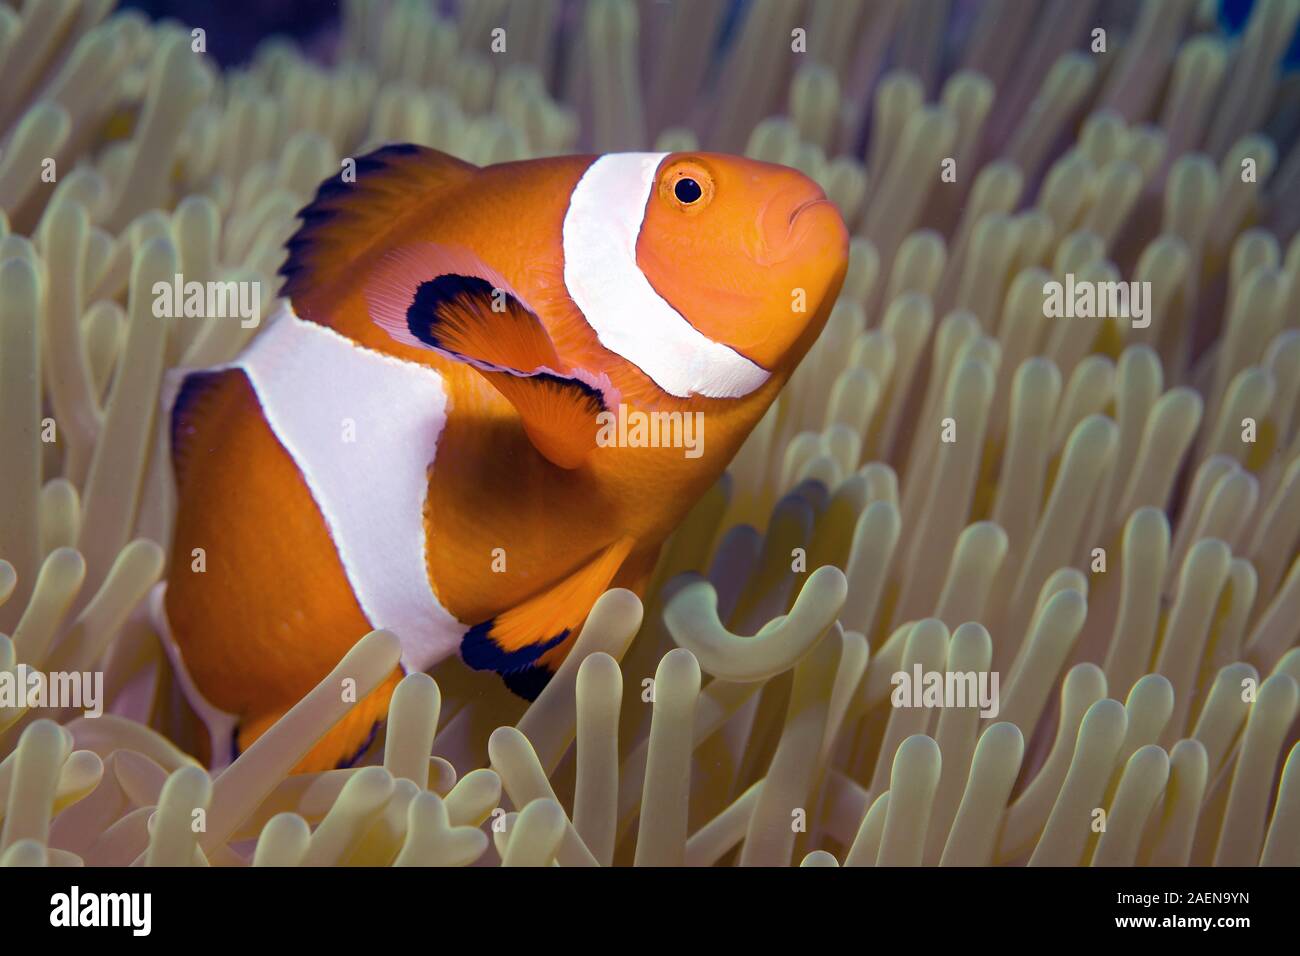 Western clown anemonefish (Amphiprion ocellaris) lives in symbiose with Magnificent sea anemone (Heteractis magnifica), Dumaguete, Negros, Philippines Stock Photo